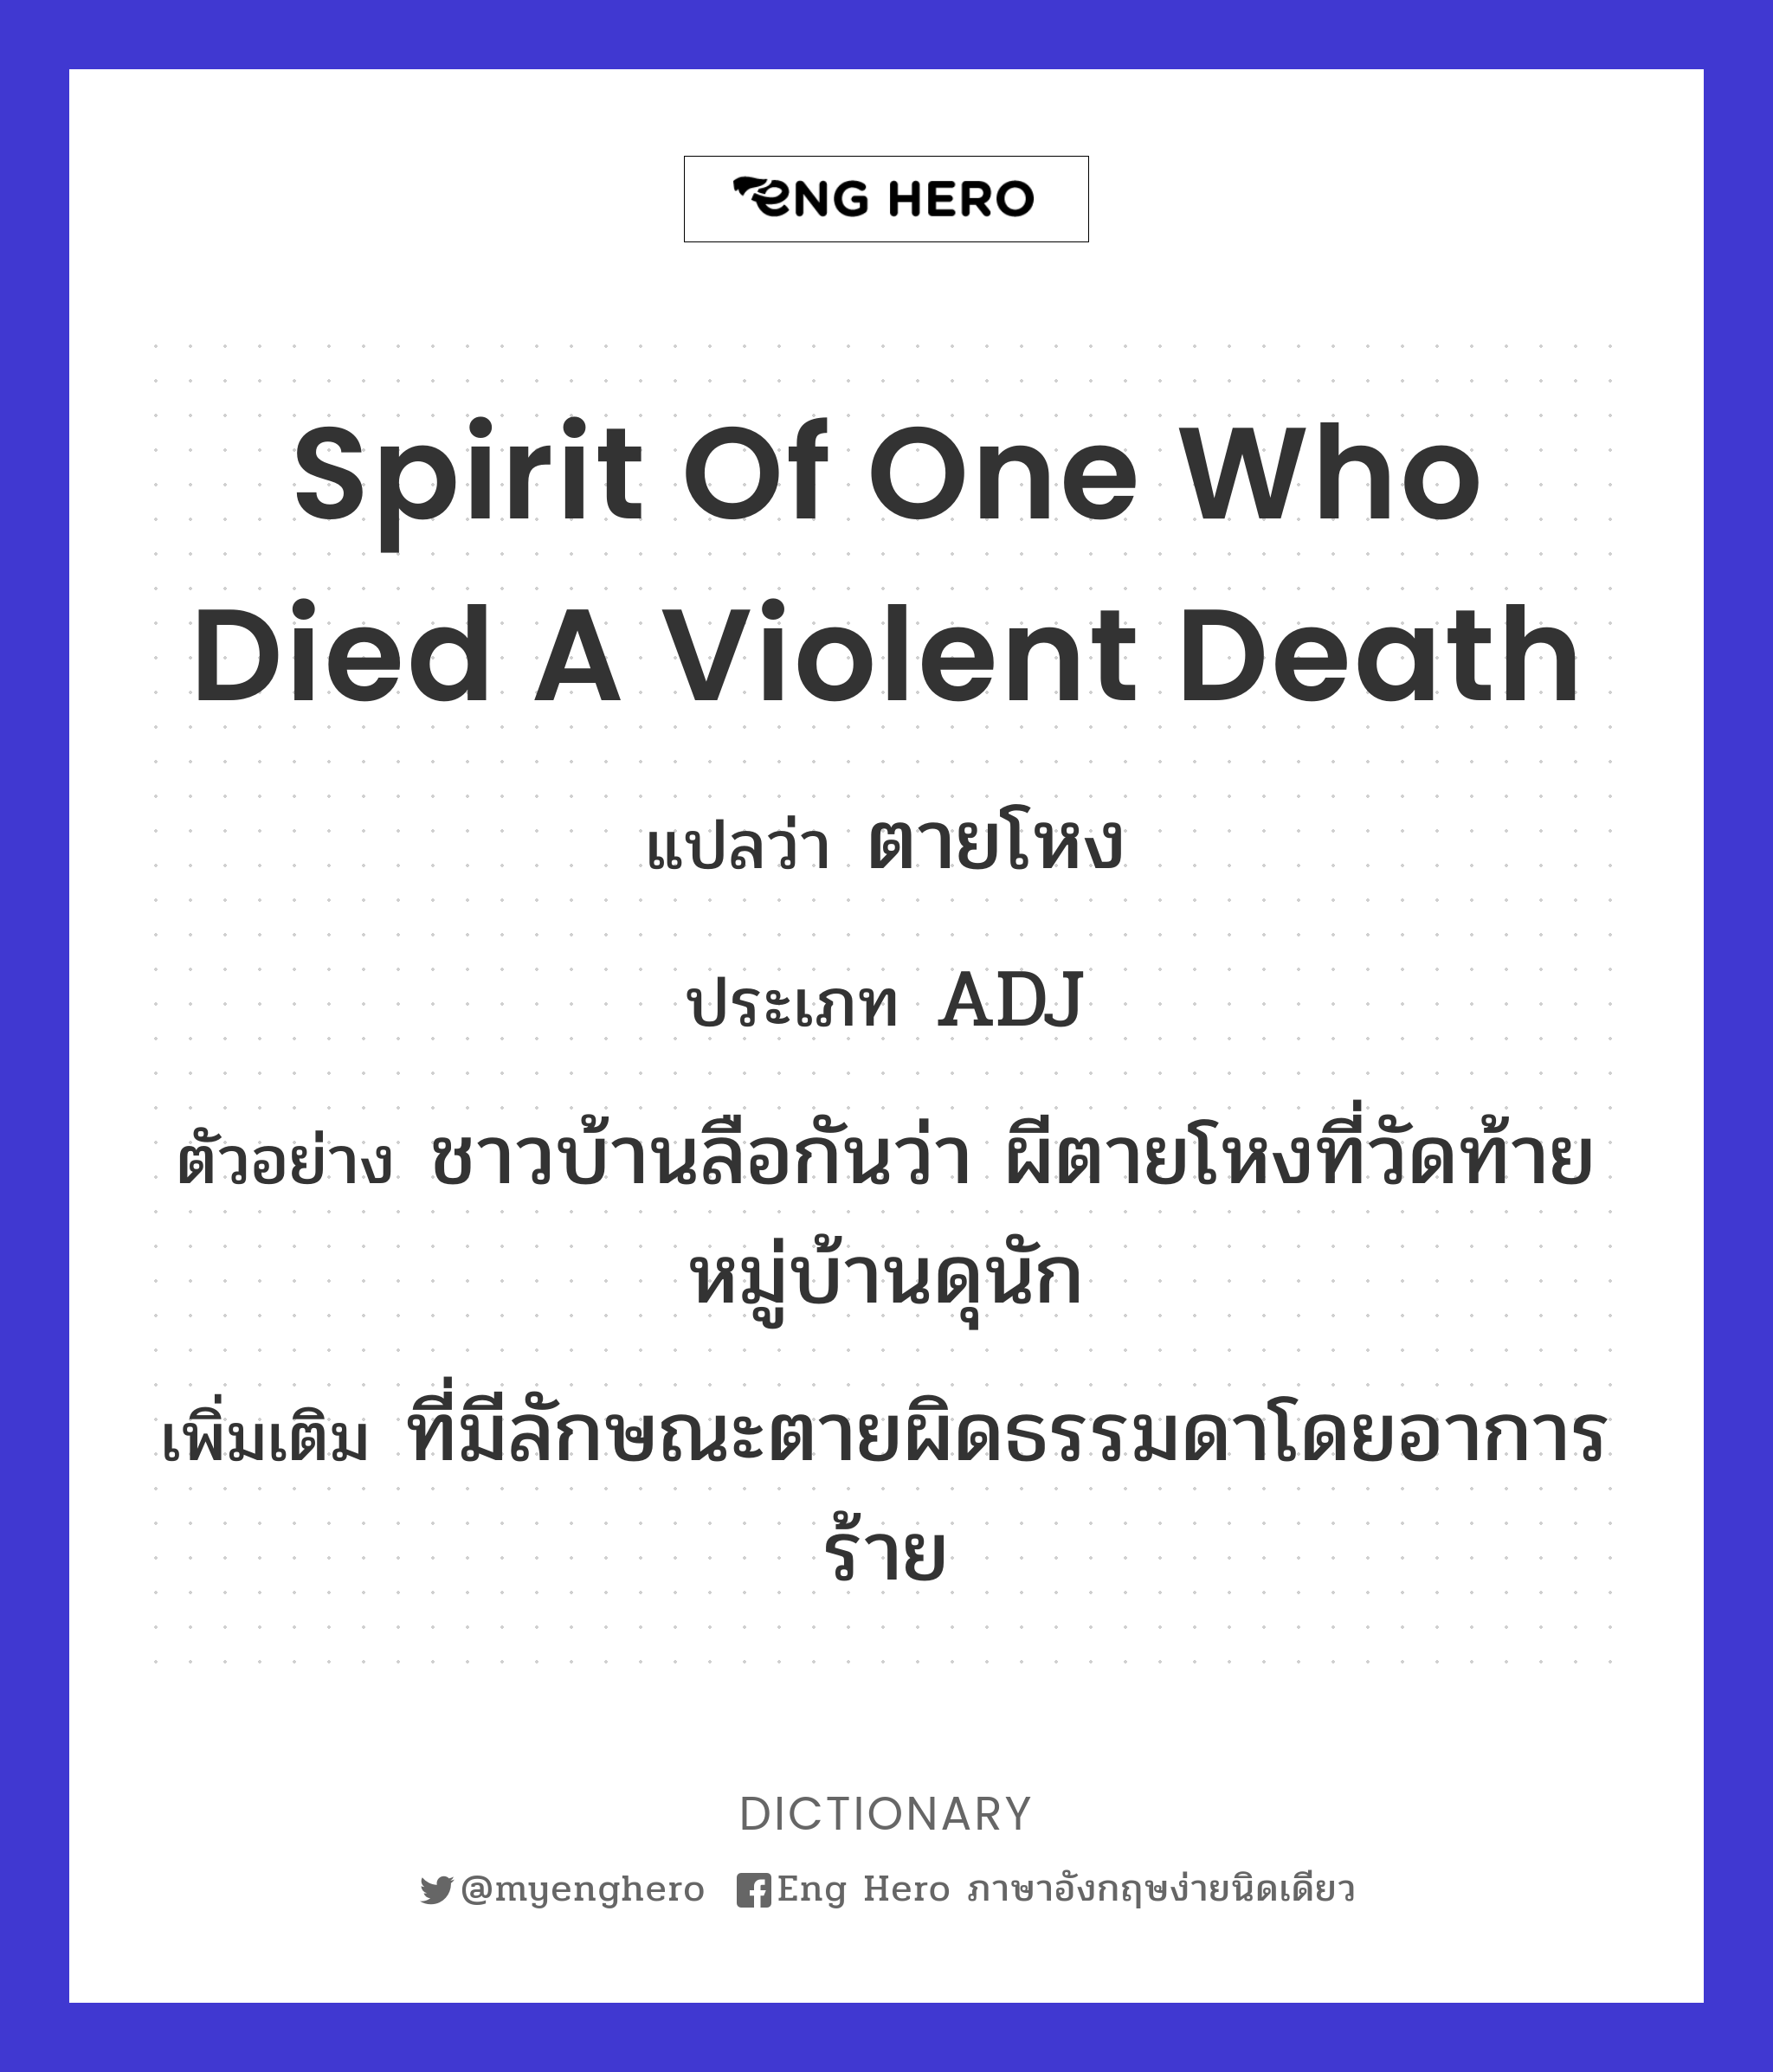 spirit of one who died a violent death